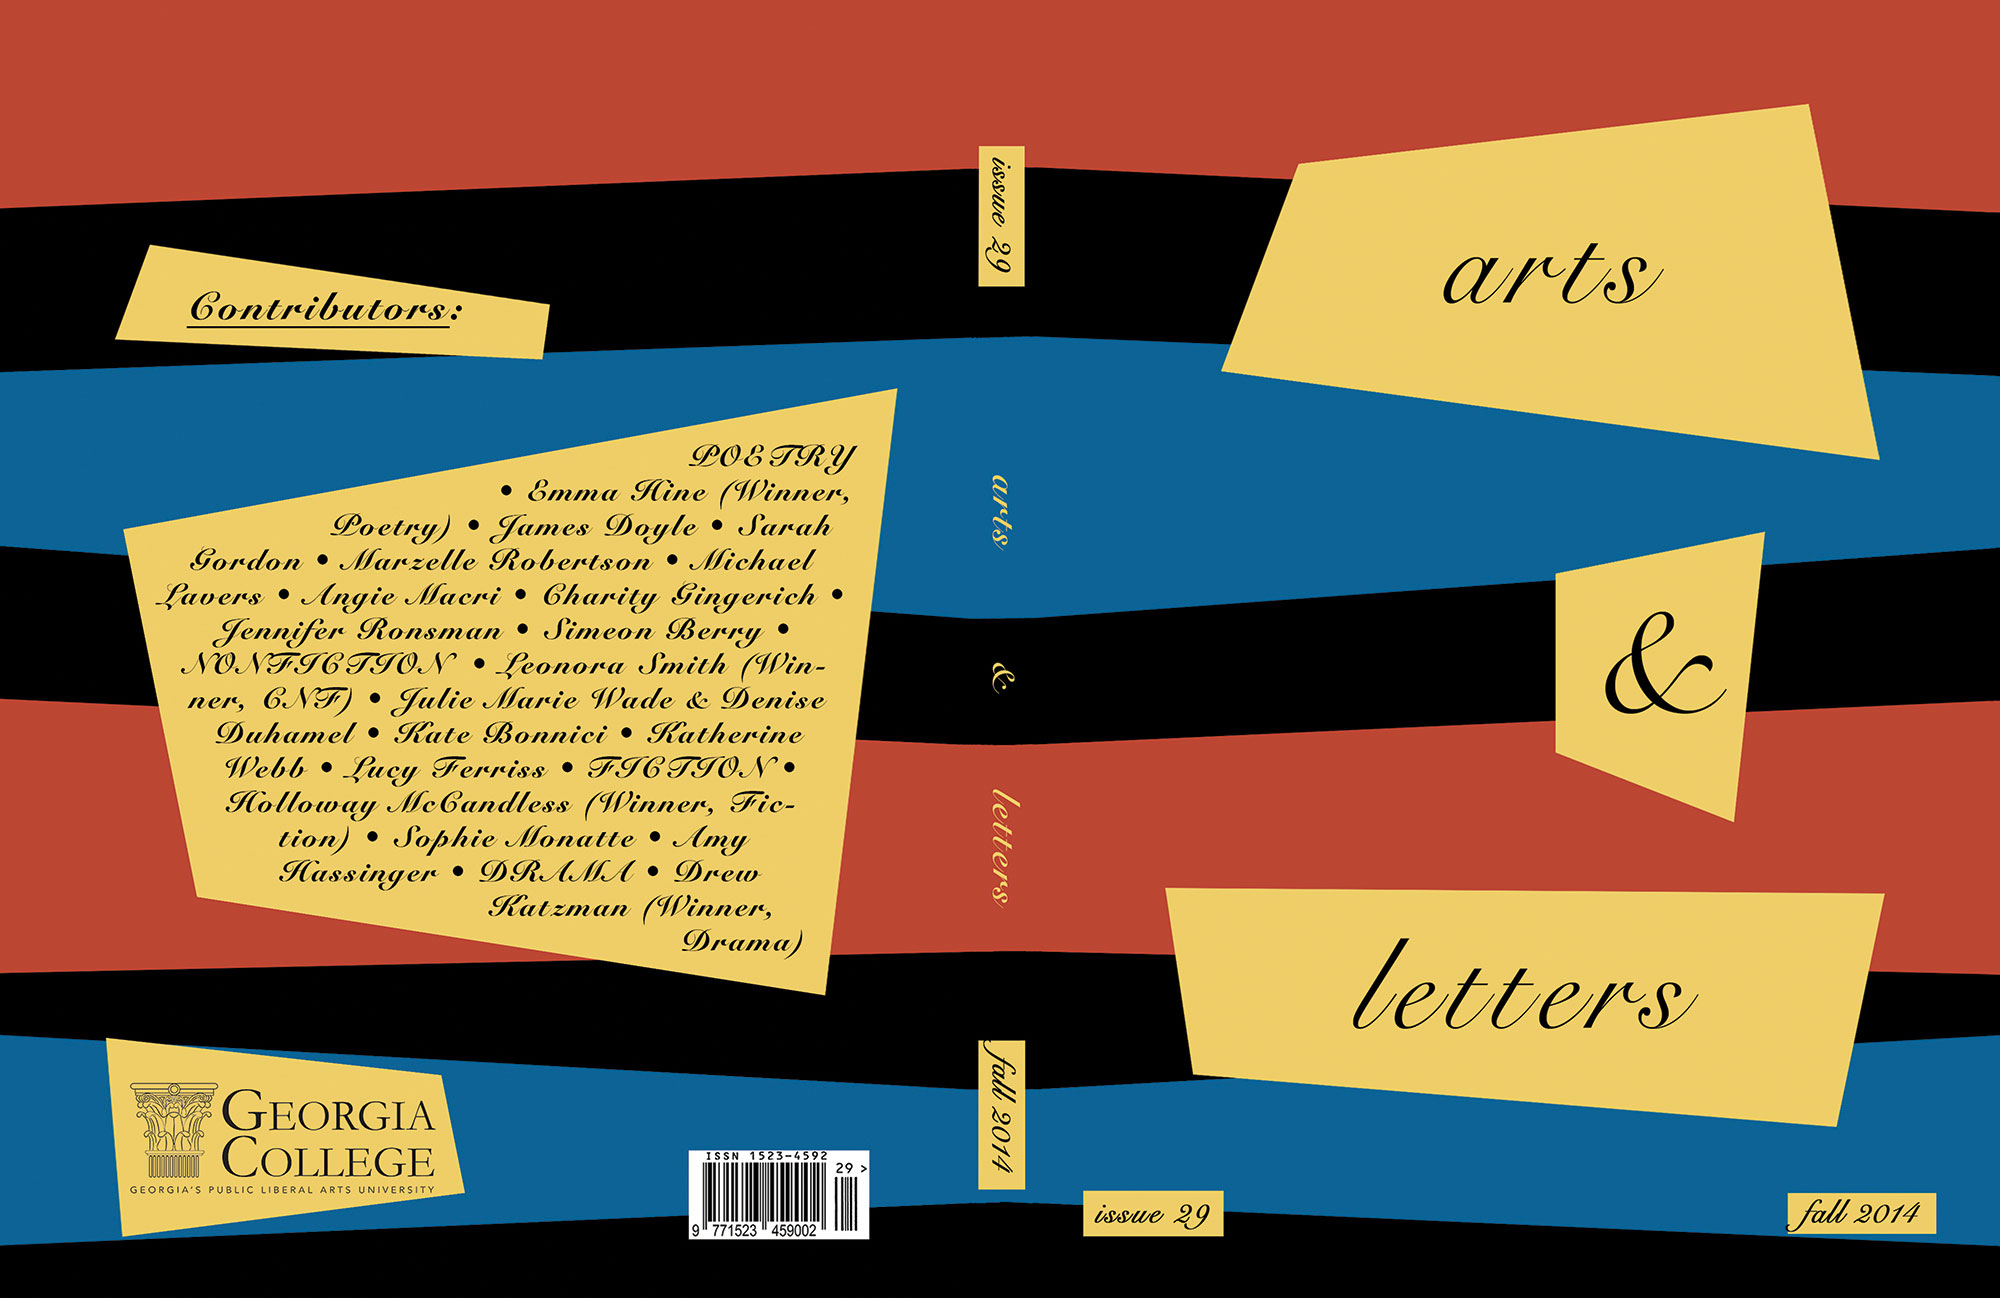 Arts & Letters, Issue 29